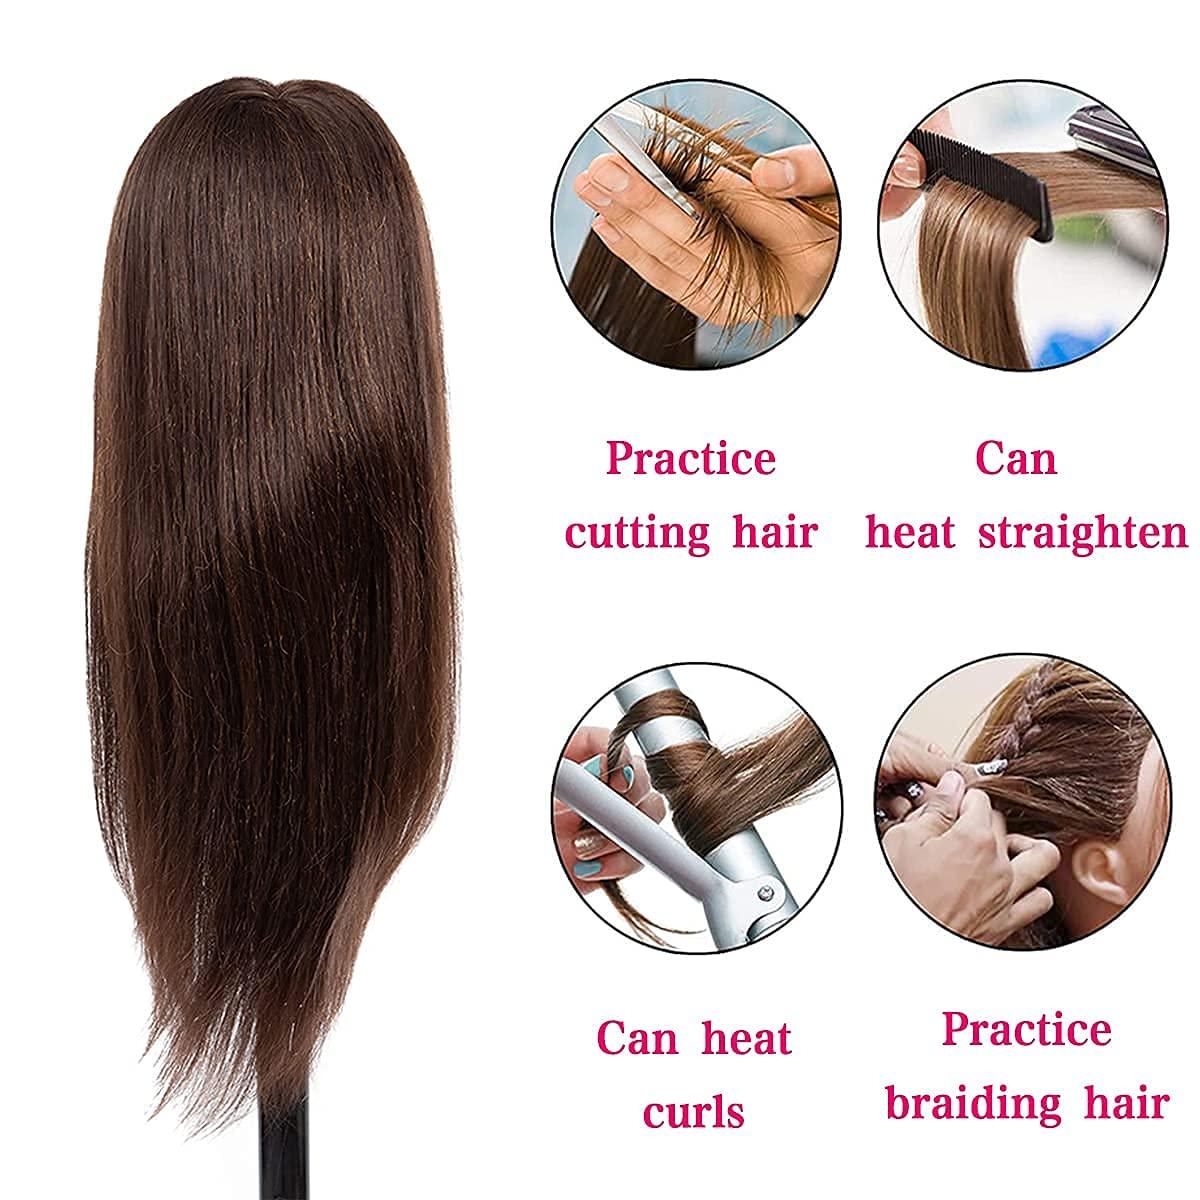 26''-28'' Long Hair Mannequin Head With Real Hair 60% Training